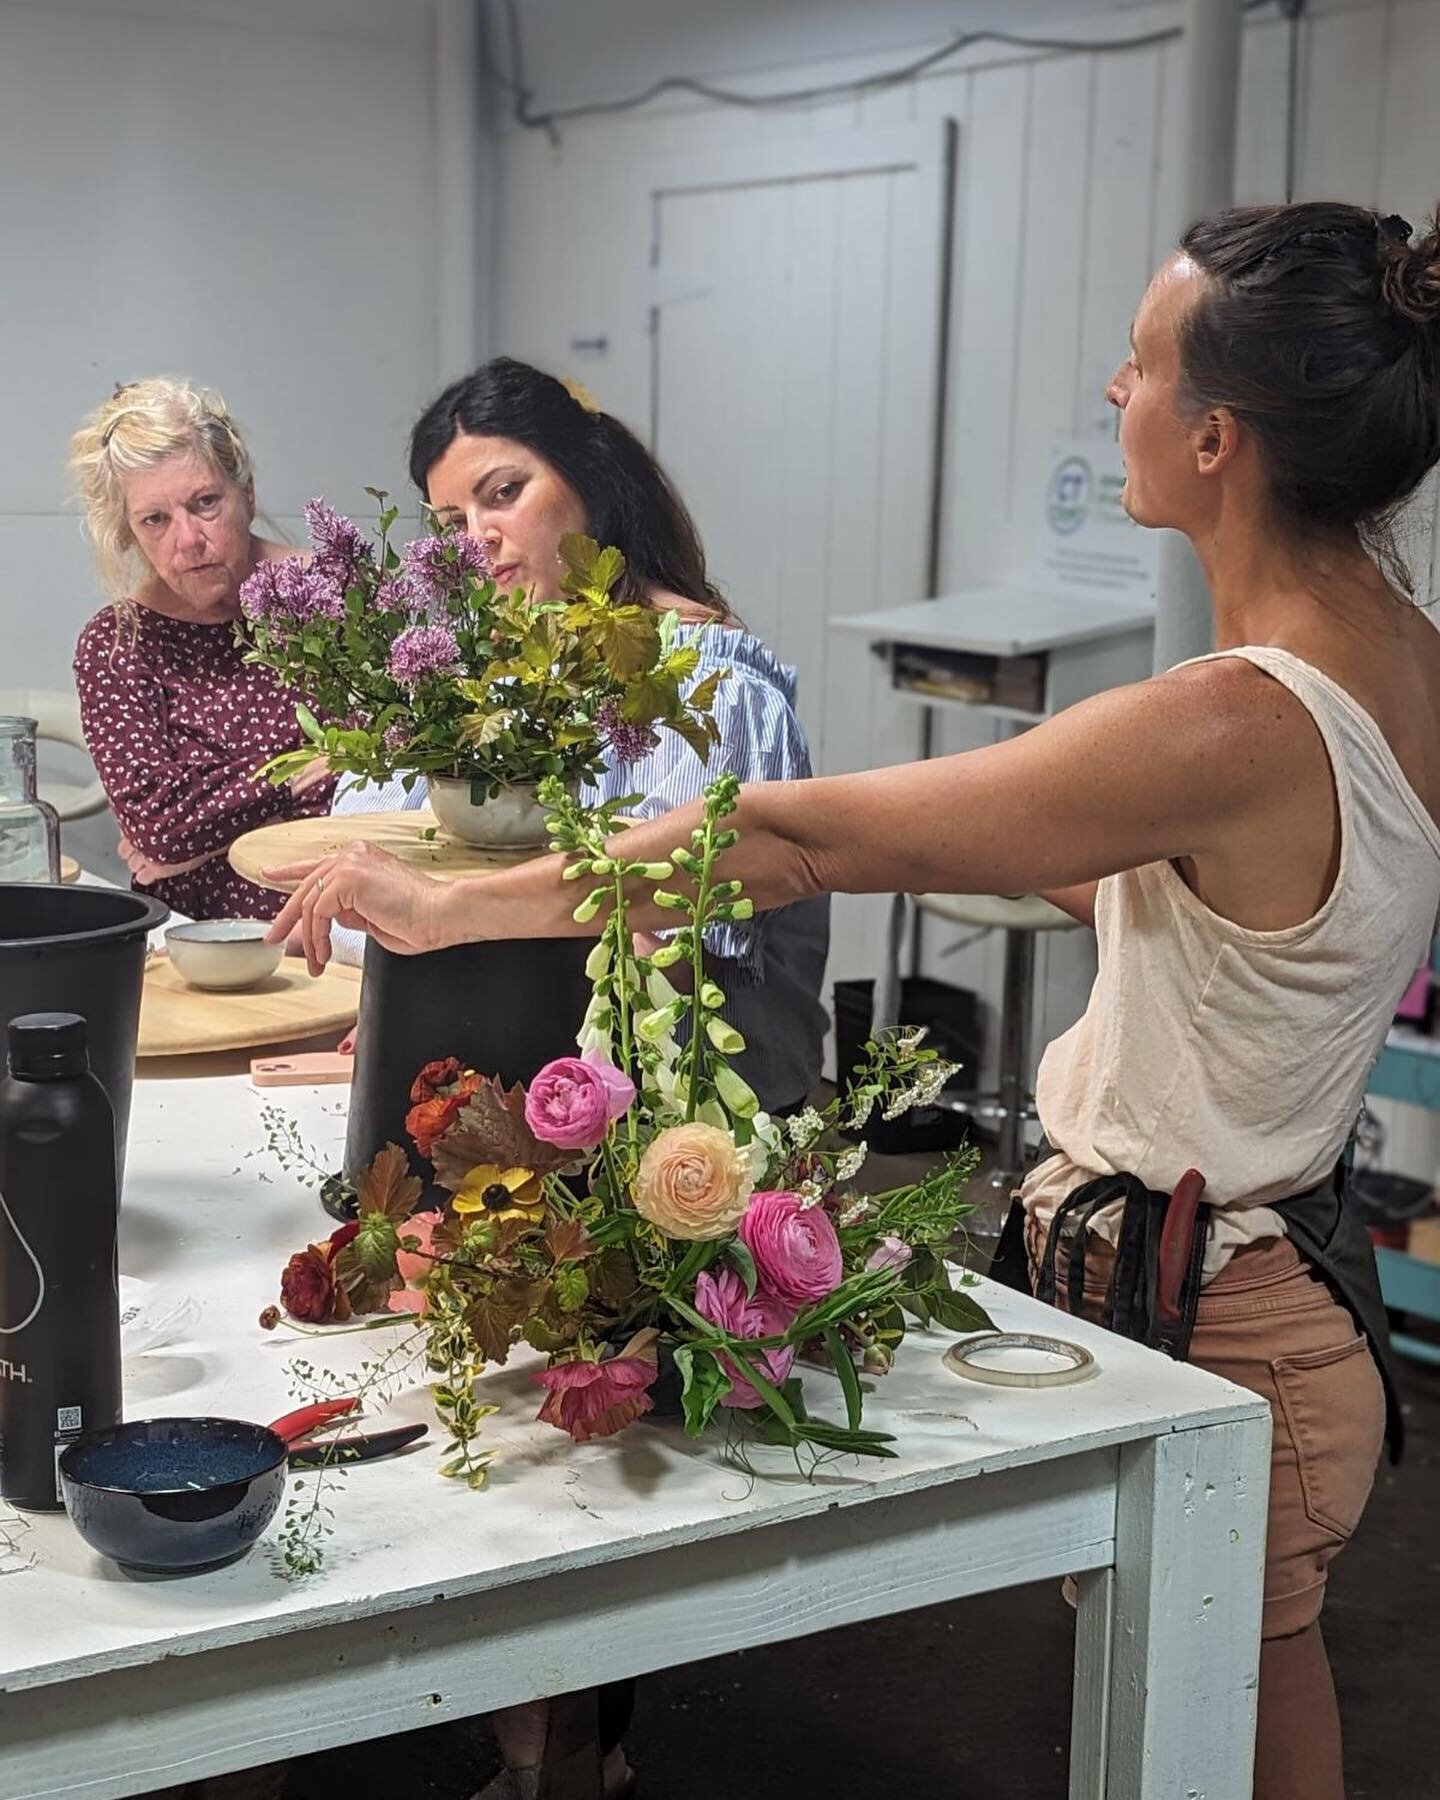 This past weekend we hosted our first workshop of the season! Haley Billipp from @eddyfarmct taught everyone how to make gorgeous garden centerpieces. It was such a delight to watch everyone&rsquo;s creativity and inspiration come to life through the